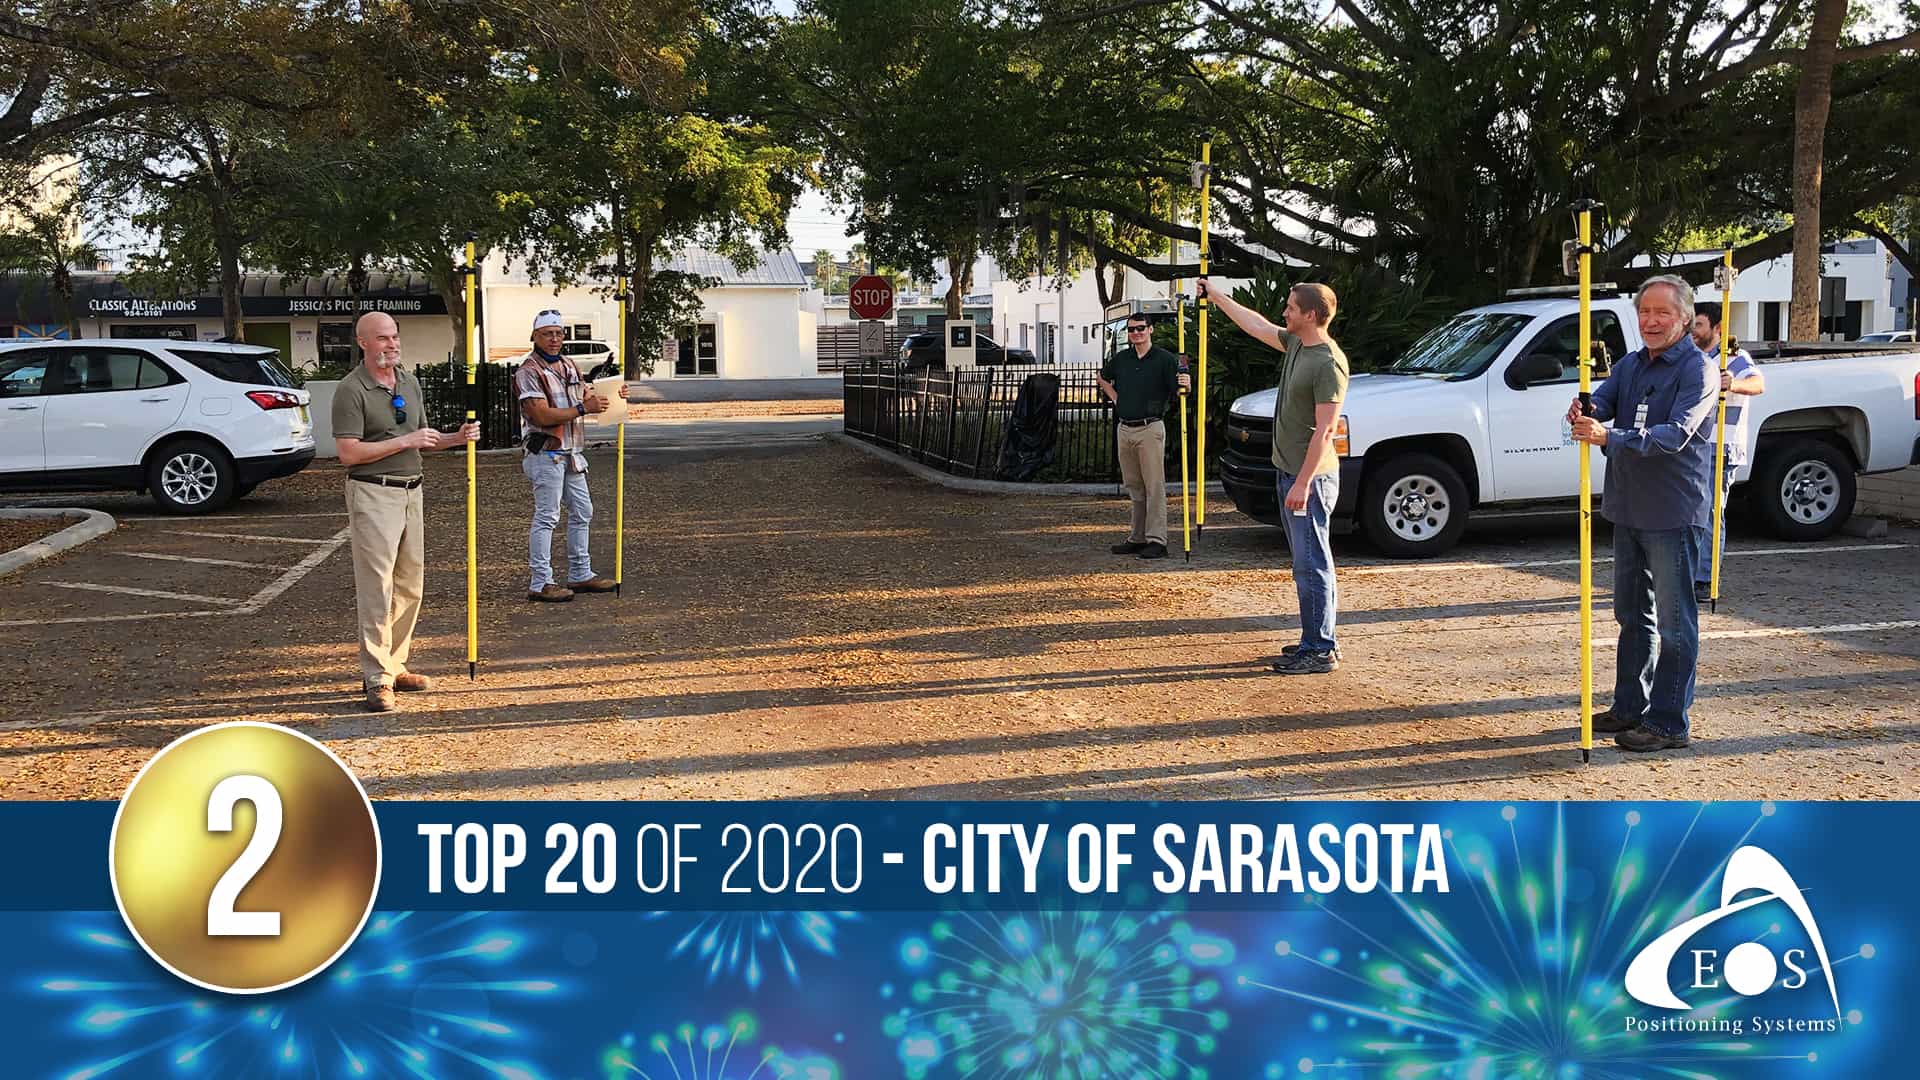 Eos Positioning Systems blog top articles of 2020: 2 - City of Sarasota